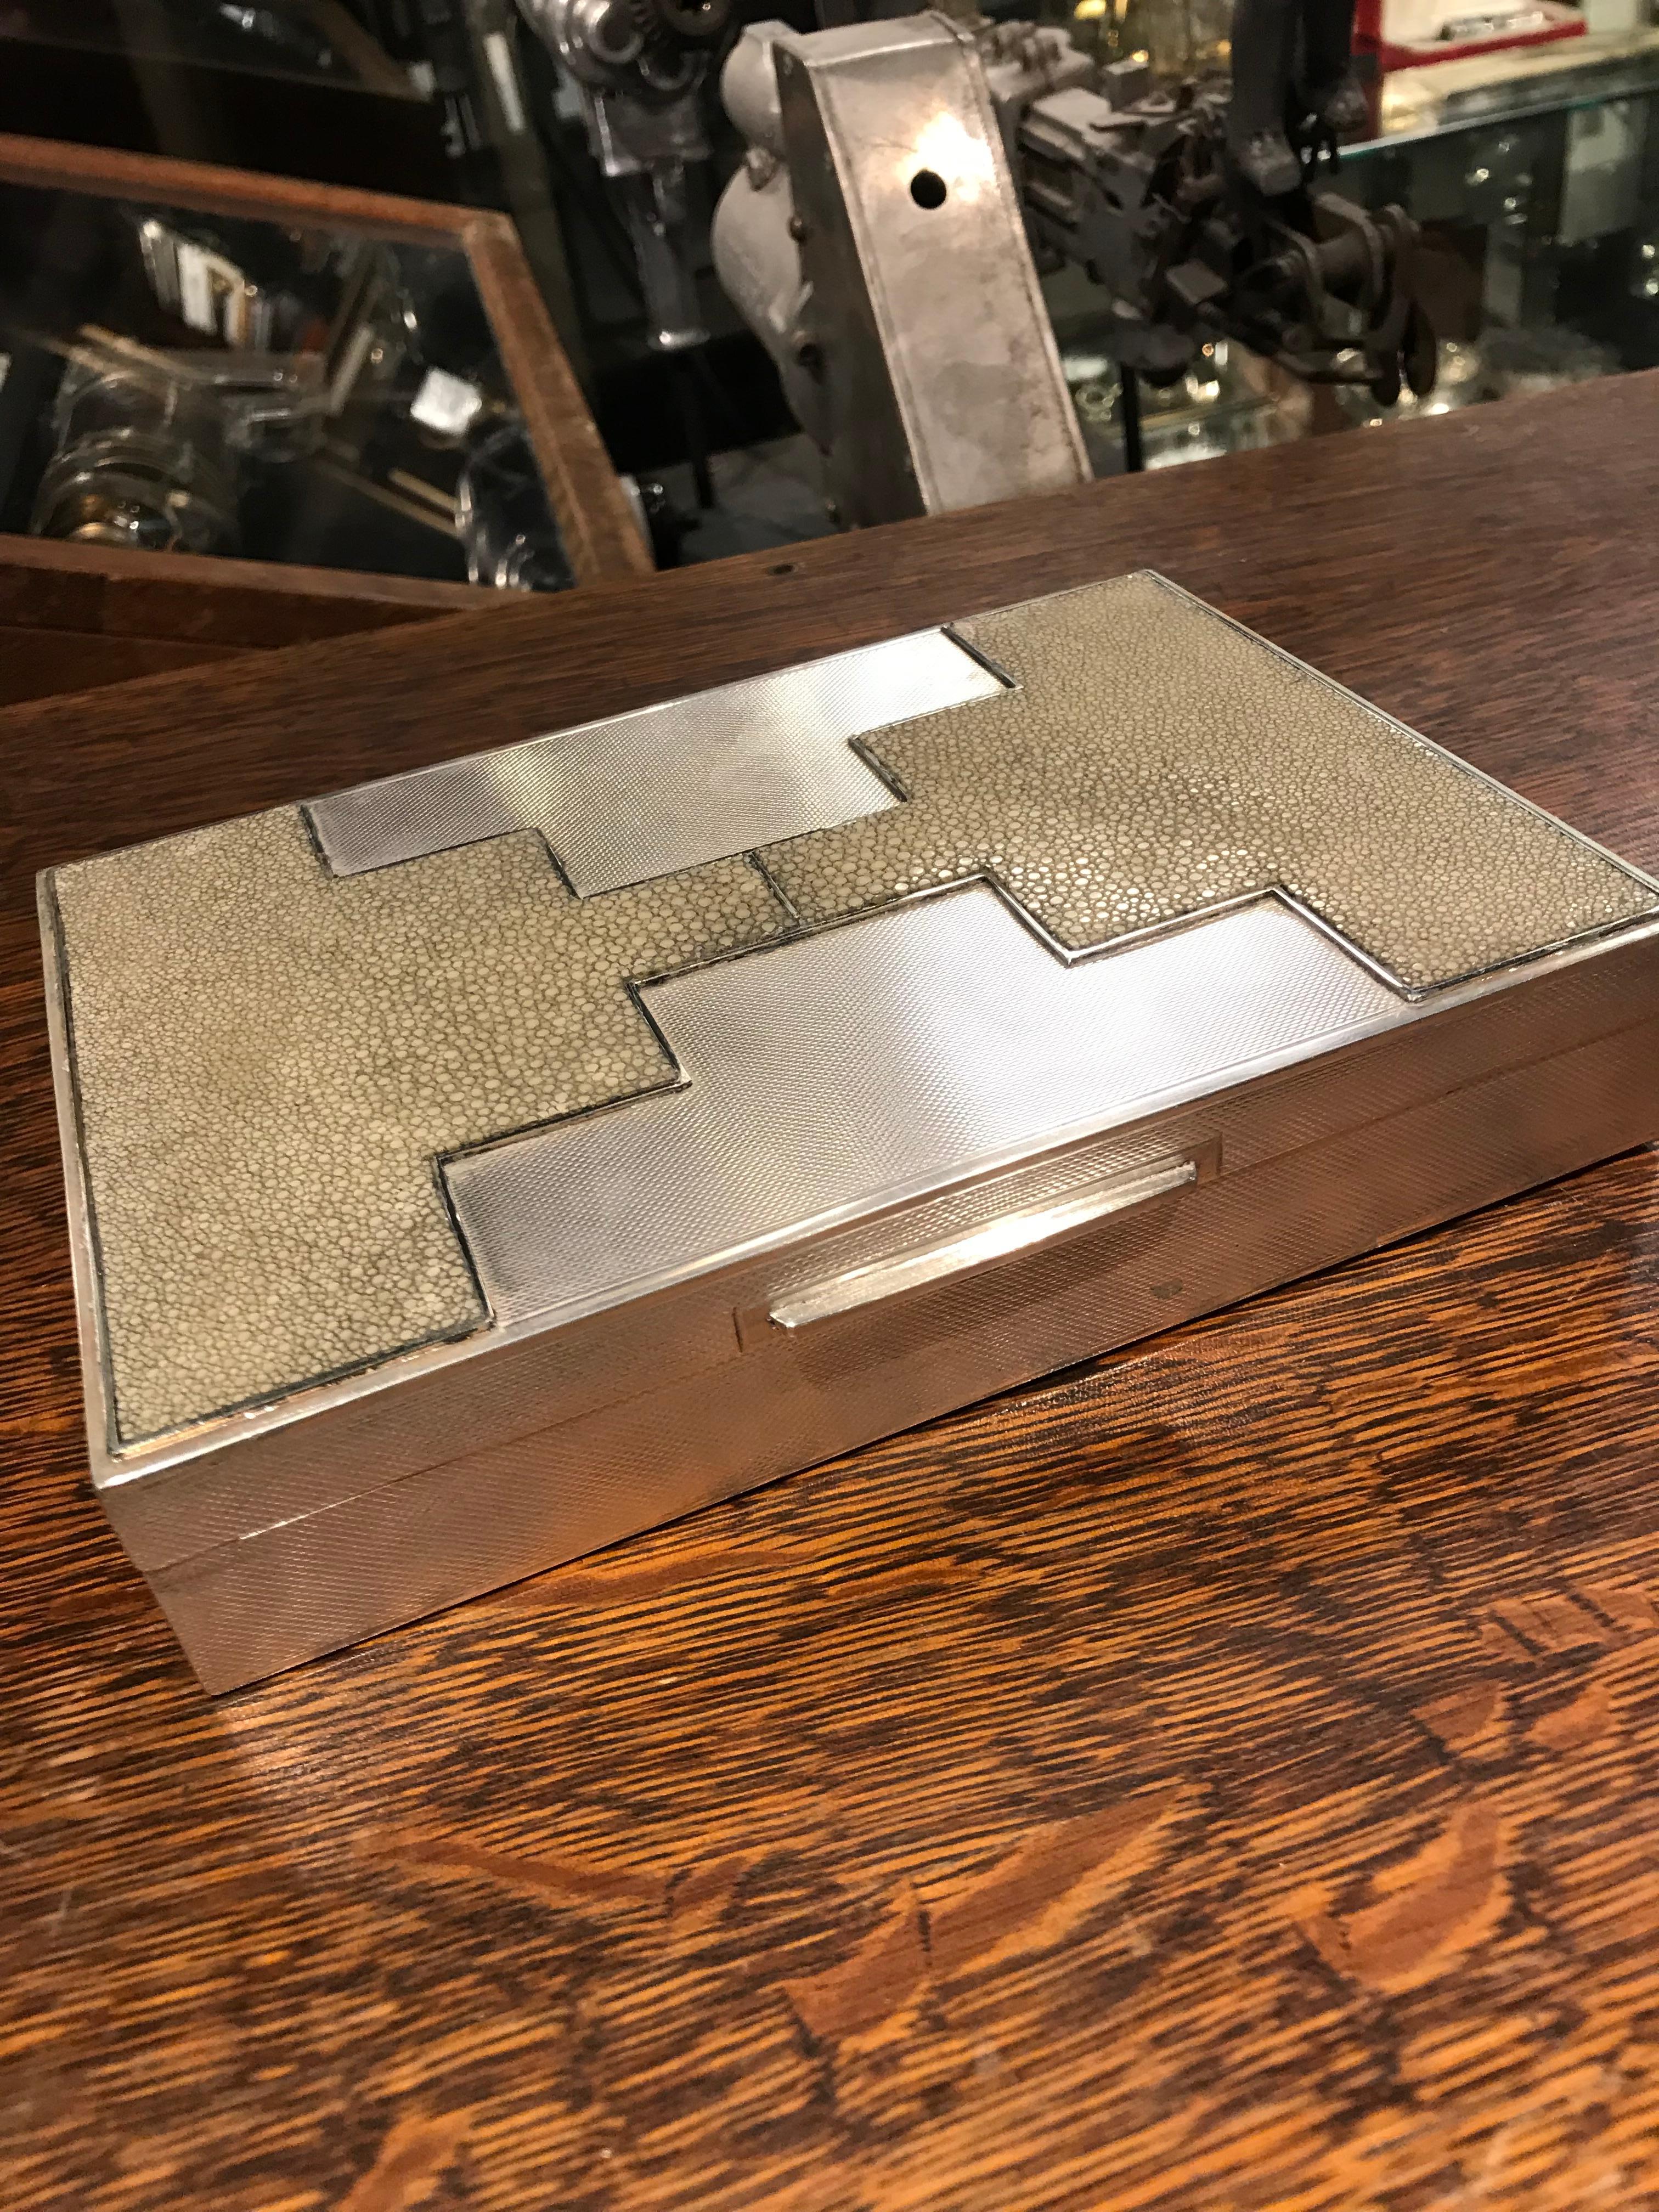 An incredible example of Art Deco luxury. This box has an engine turned texture with shagreen embellished in a skyscraper motif. Great scale and exemplary craftsmanship.